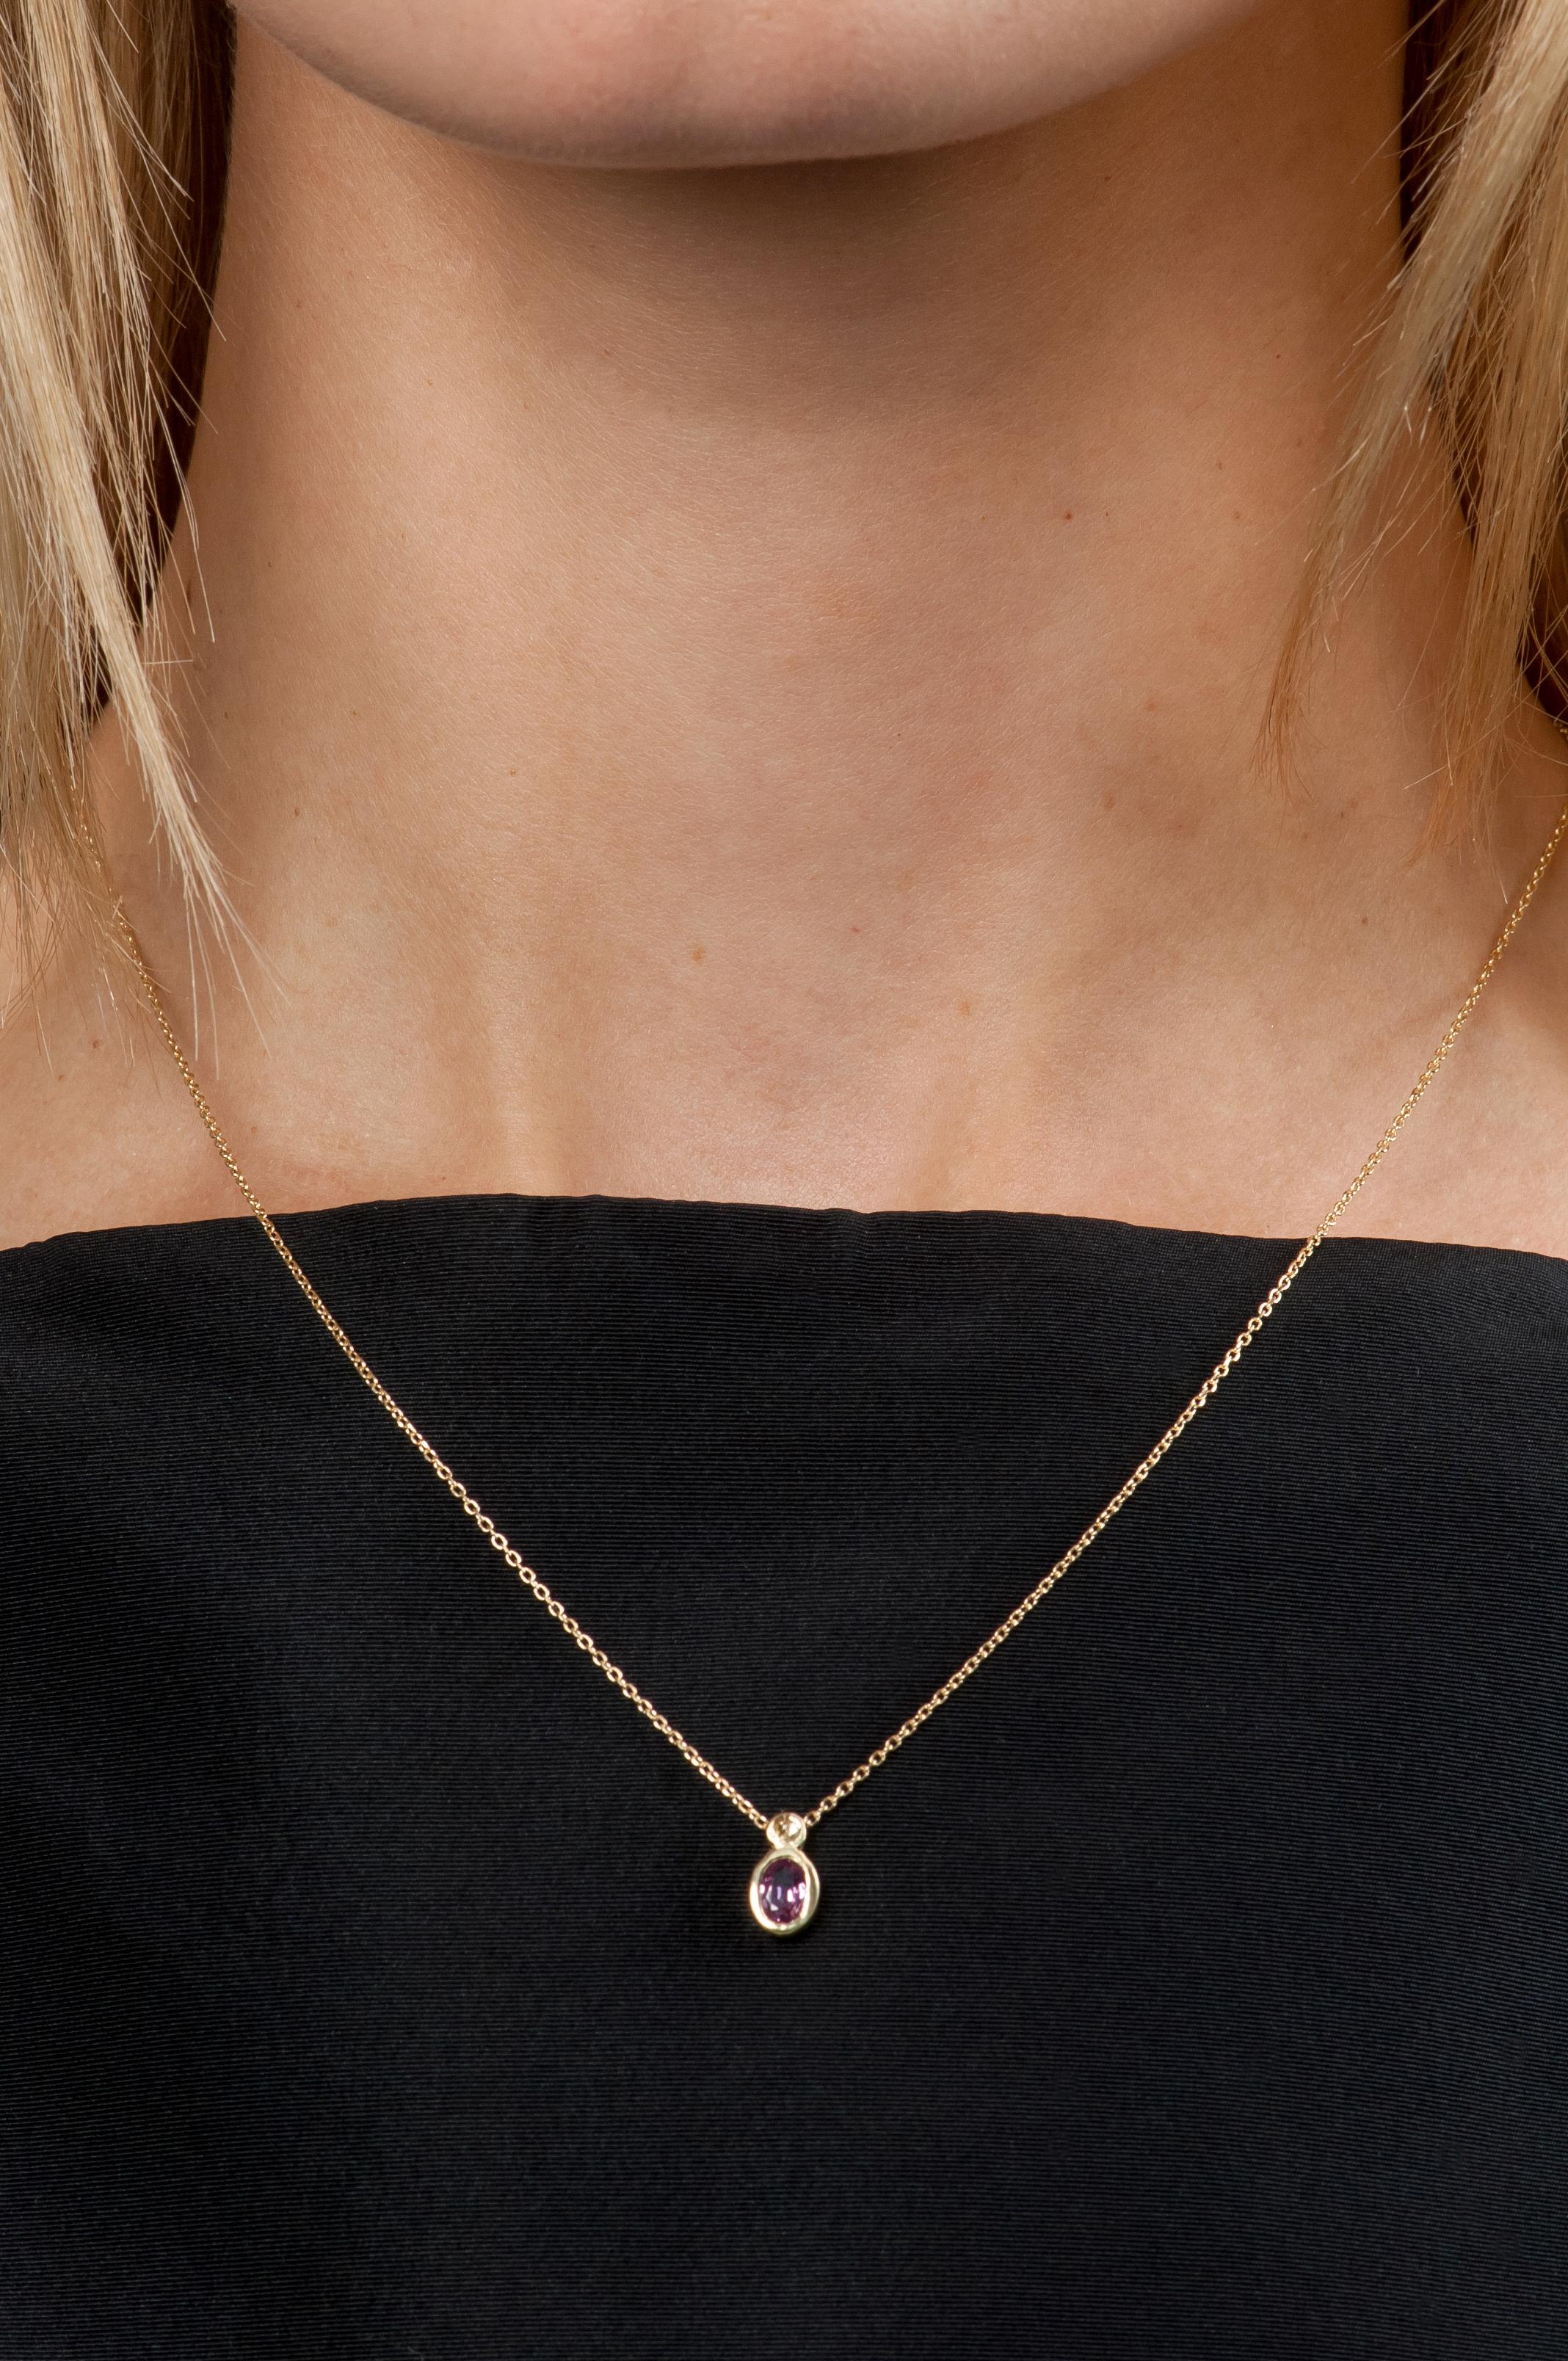 Playful colors combine to chic effect on this delicate pendant and chain.

18K yellow gold chain with bezel set 0.50ct rose cut purple/lilac sapphire and 0.05ct round full cut pink sapphire drop pendant.
18” chain.